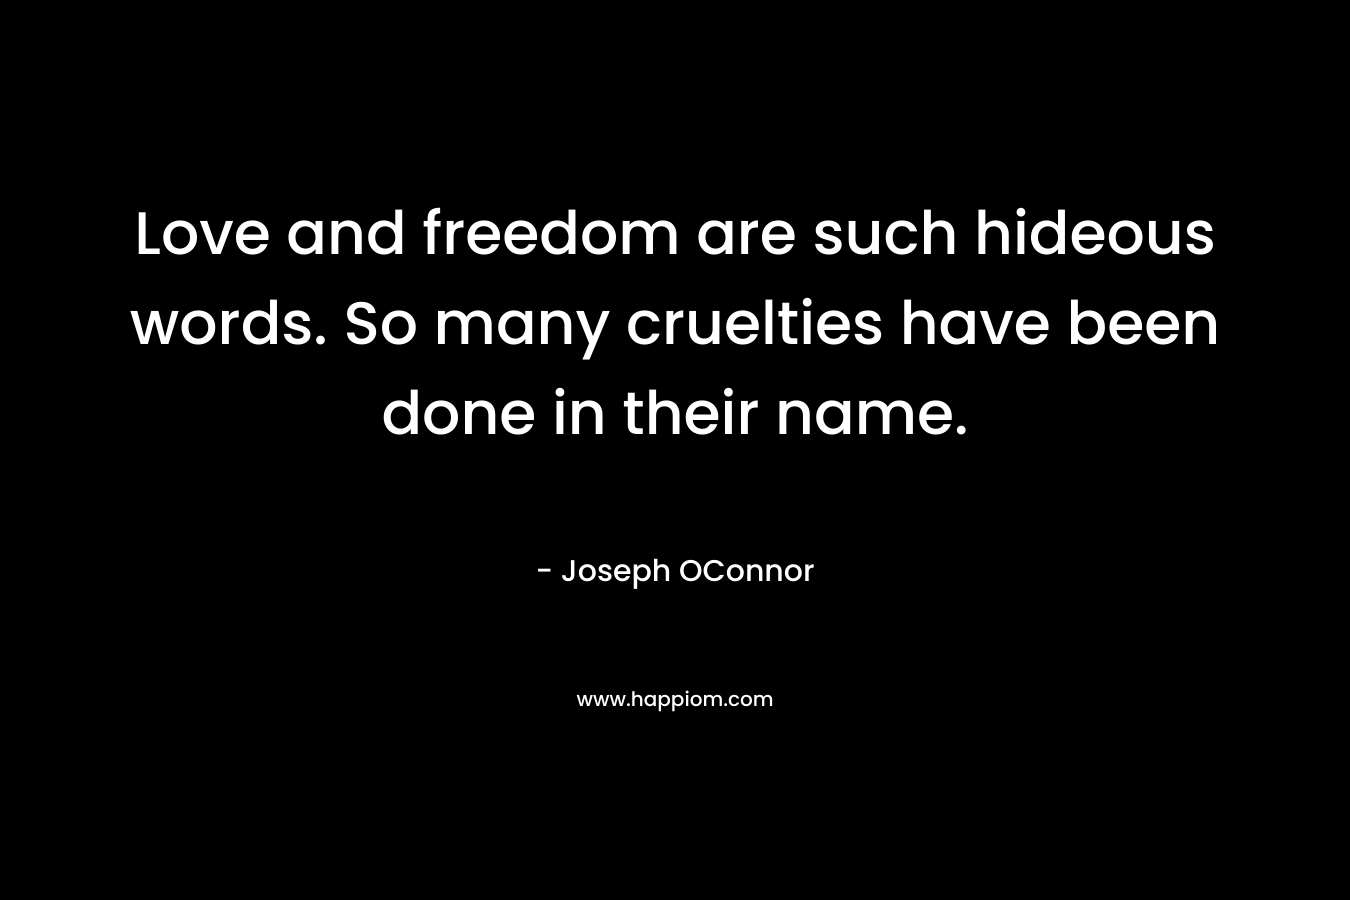 Love and freedom are such hideous words. So many cruelties have been done in their name. – Joseph OConnor